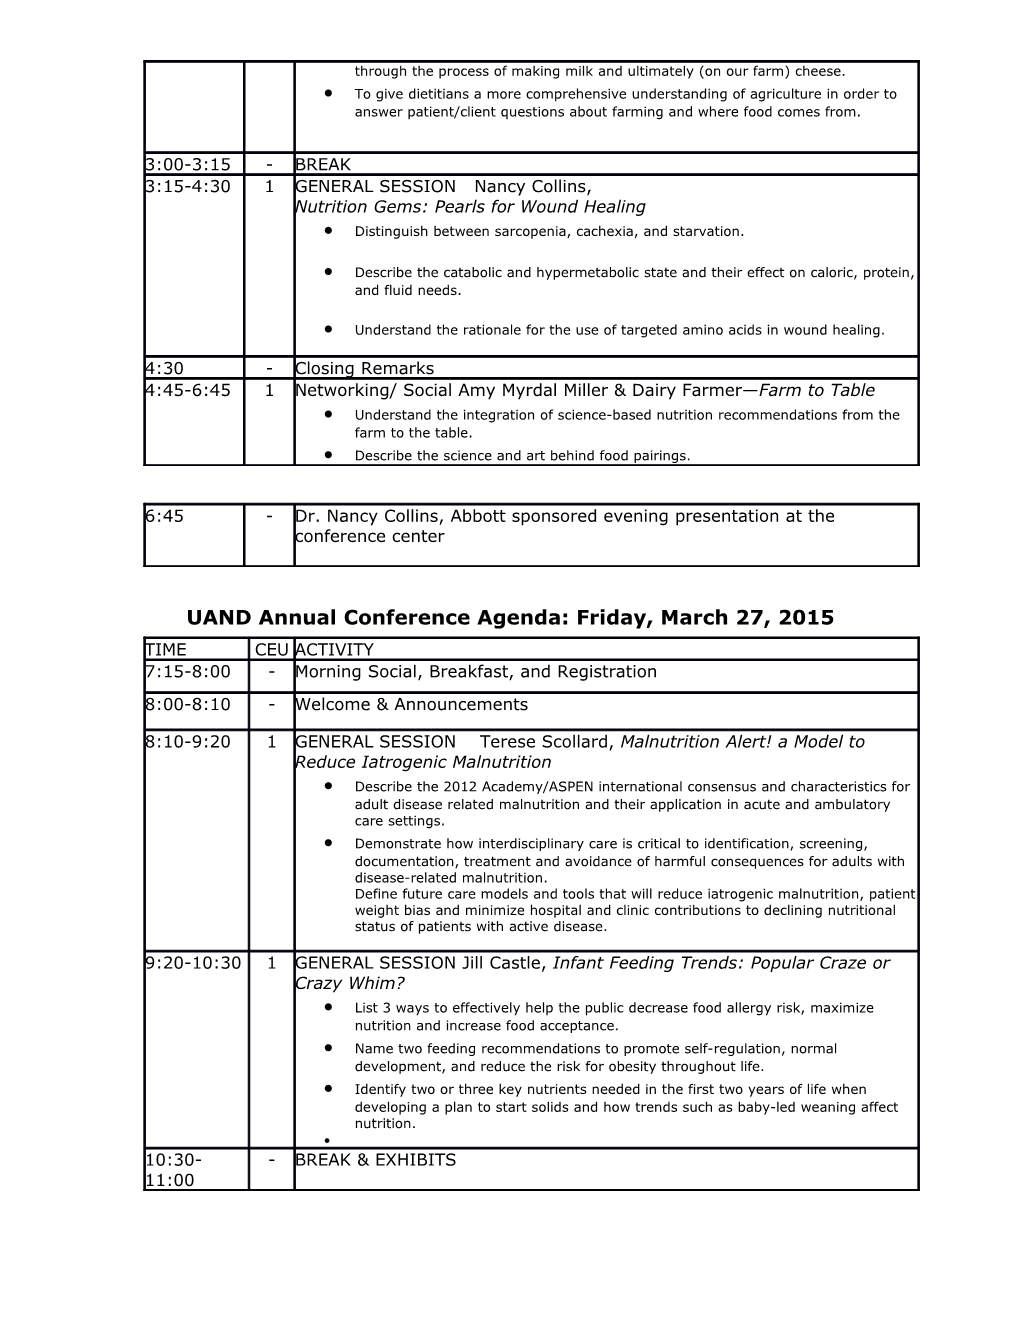 UAND Annual Conference Agenda: Thursday, March 26, 2015